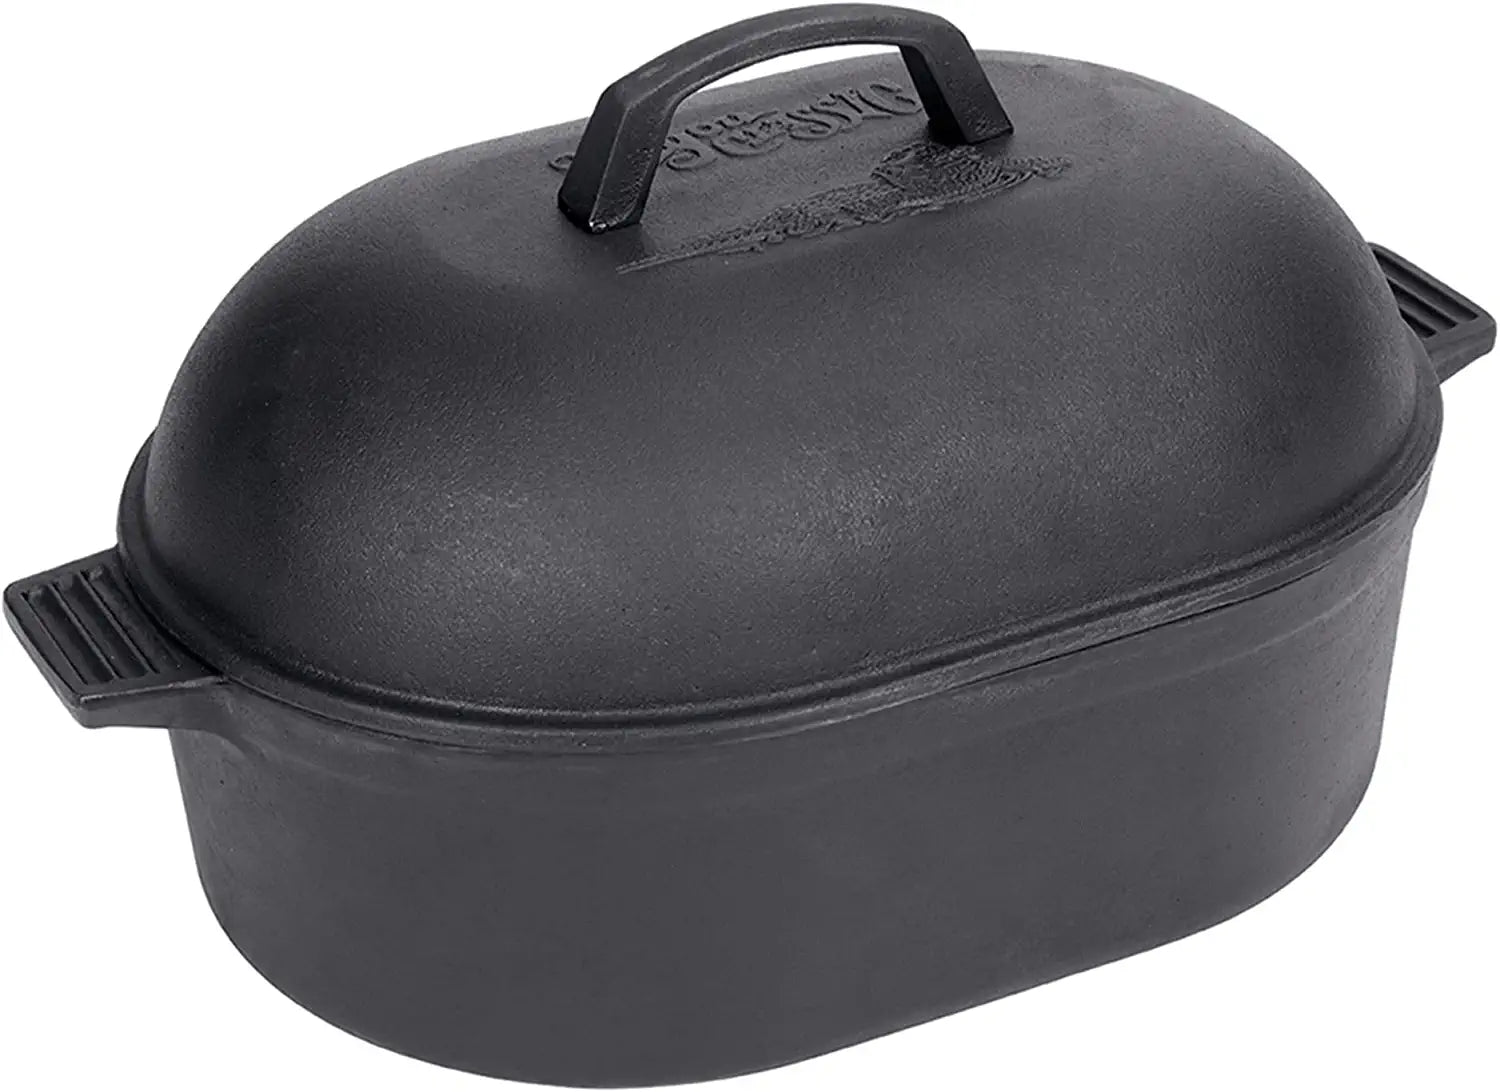 Bayou Classic 7418 12-qt Cast Iron Oval Roaster Features Domed Cast Iron Lid Perfect For Slow Cooking Roast Turkey Chicken Ham Pot Roast Stews Soups and Chili